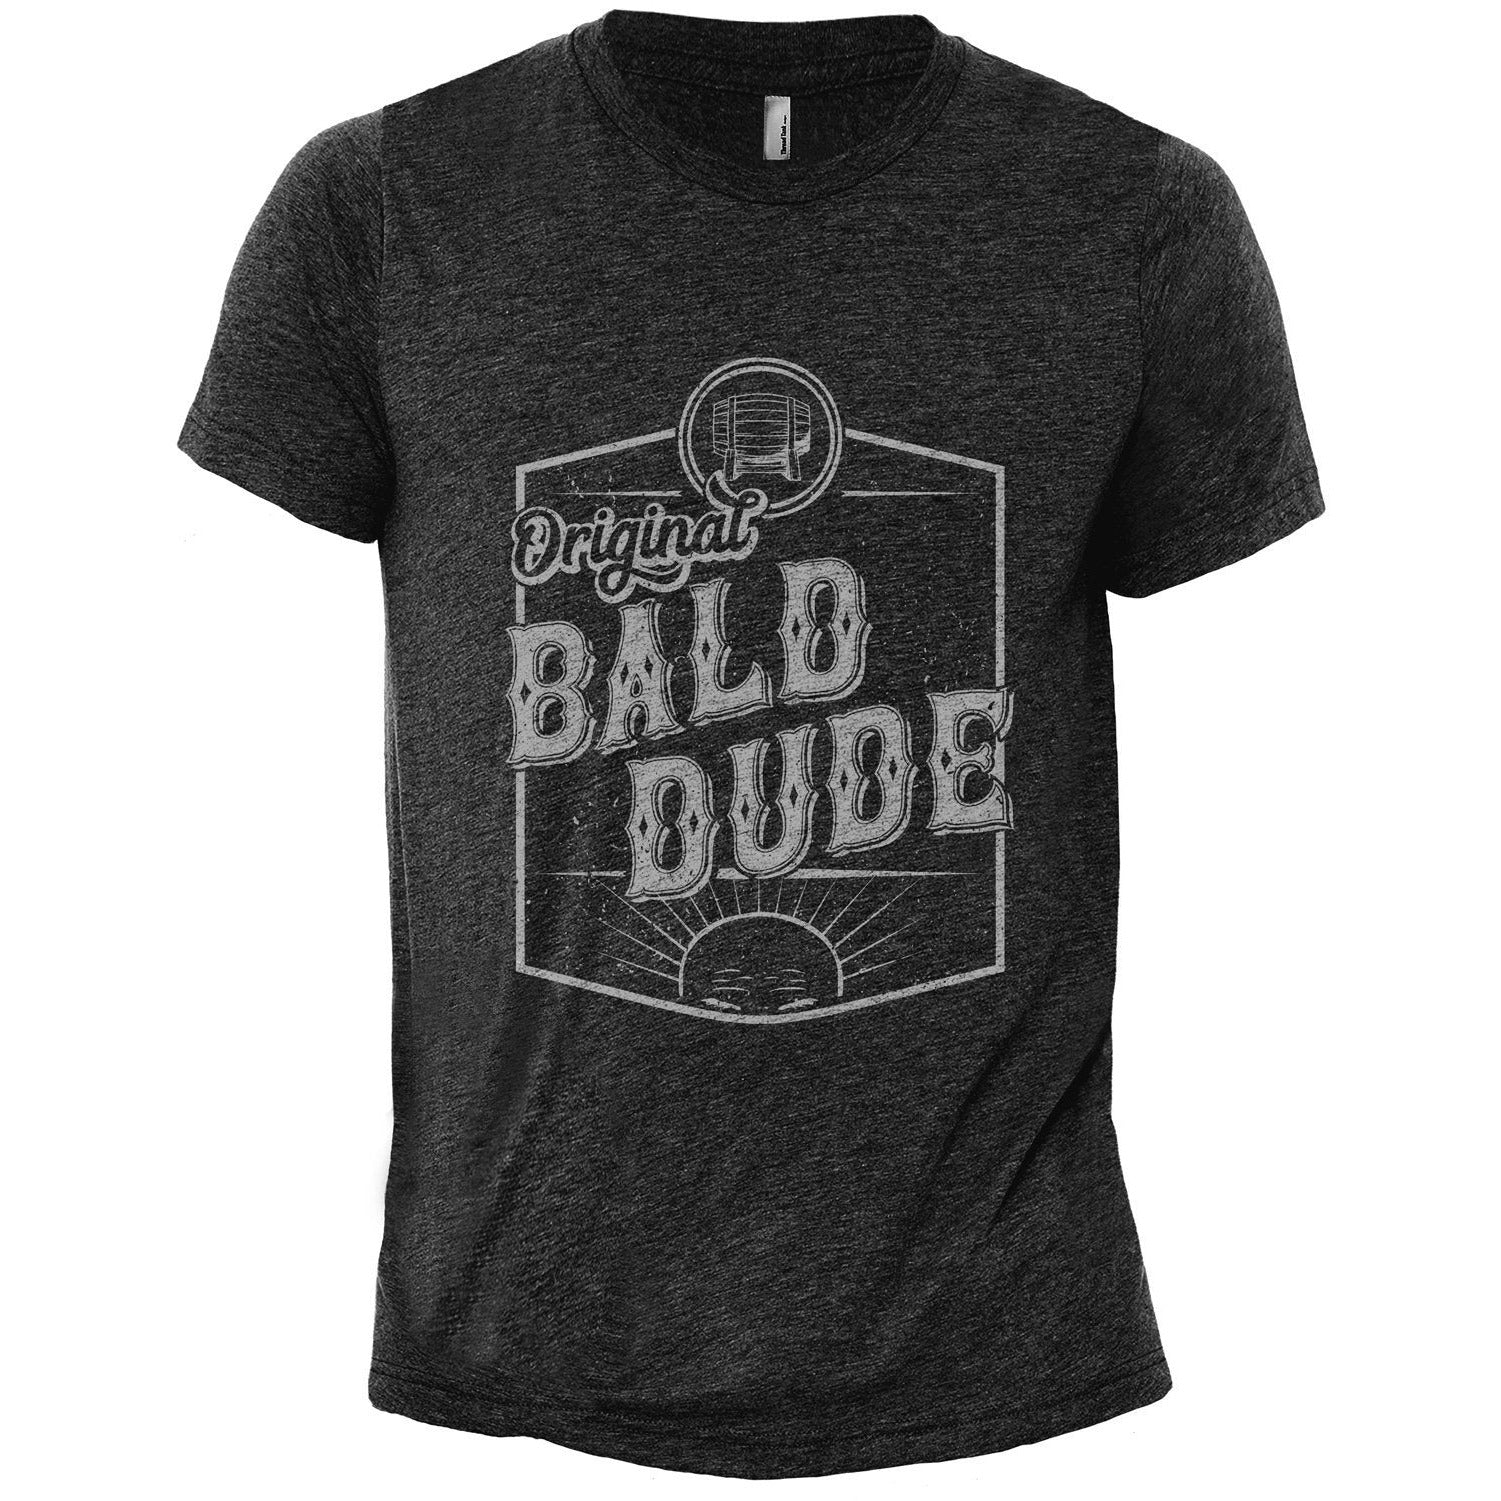 Original Bald Dude - Stories You Can Wear by Thread Tank